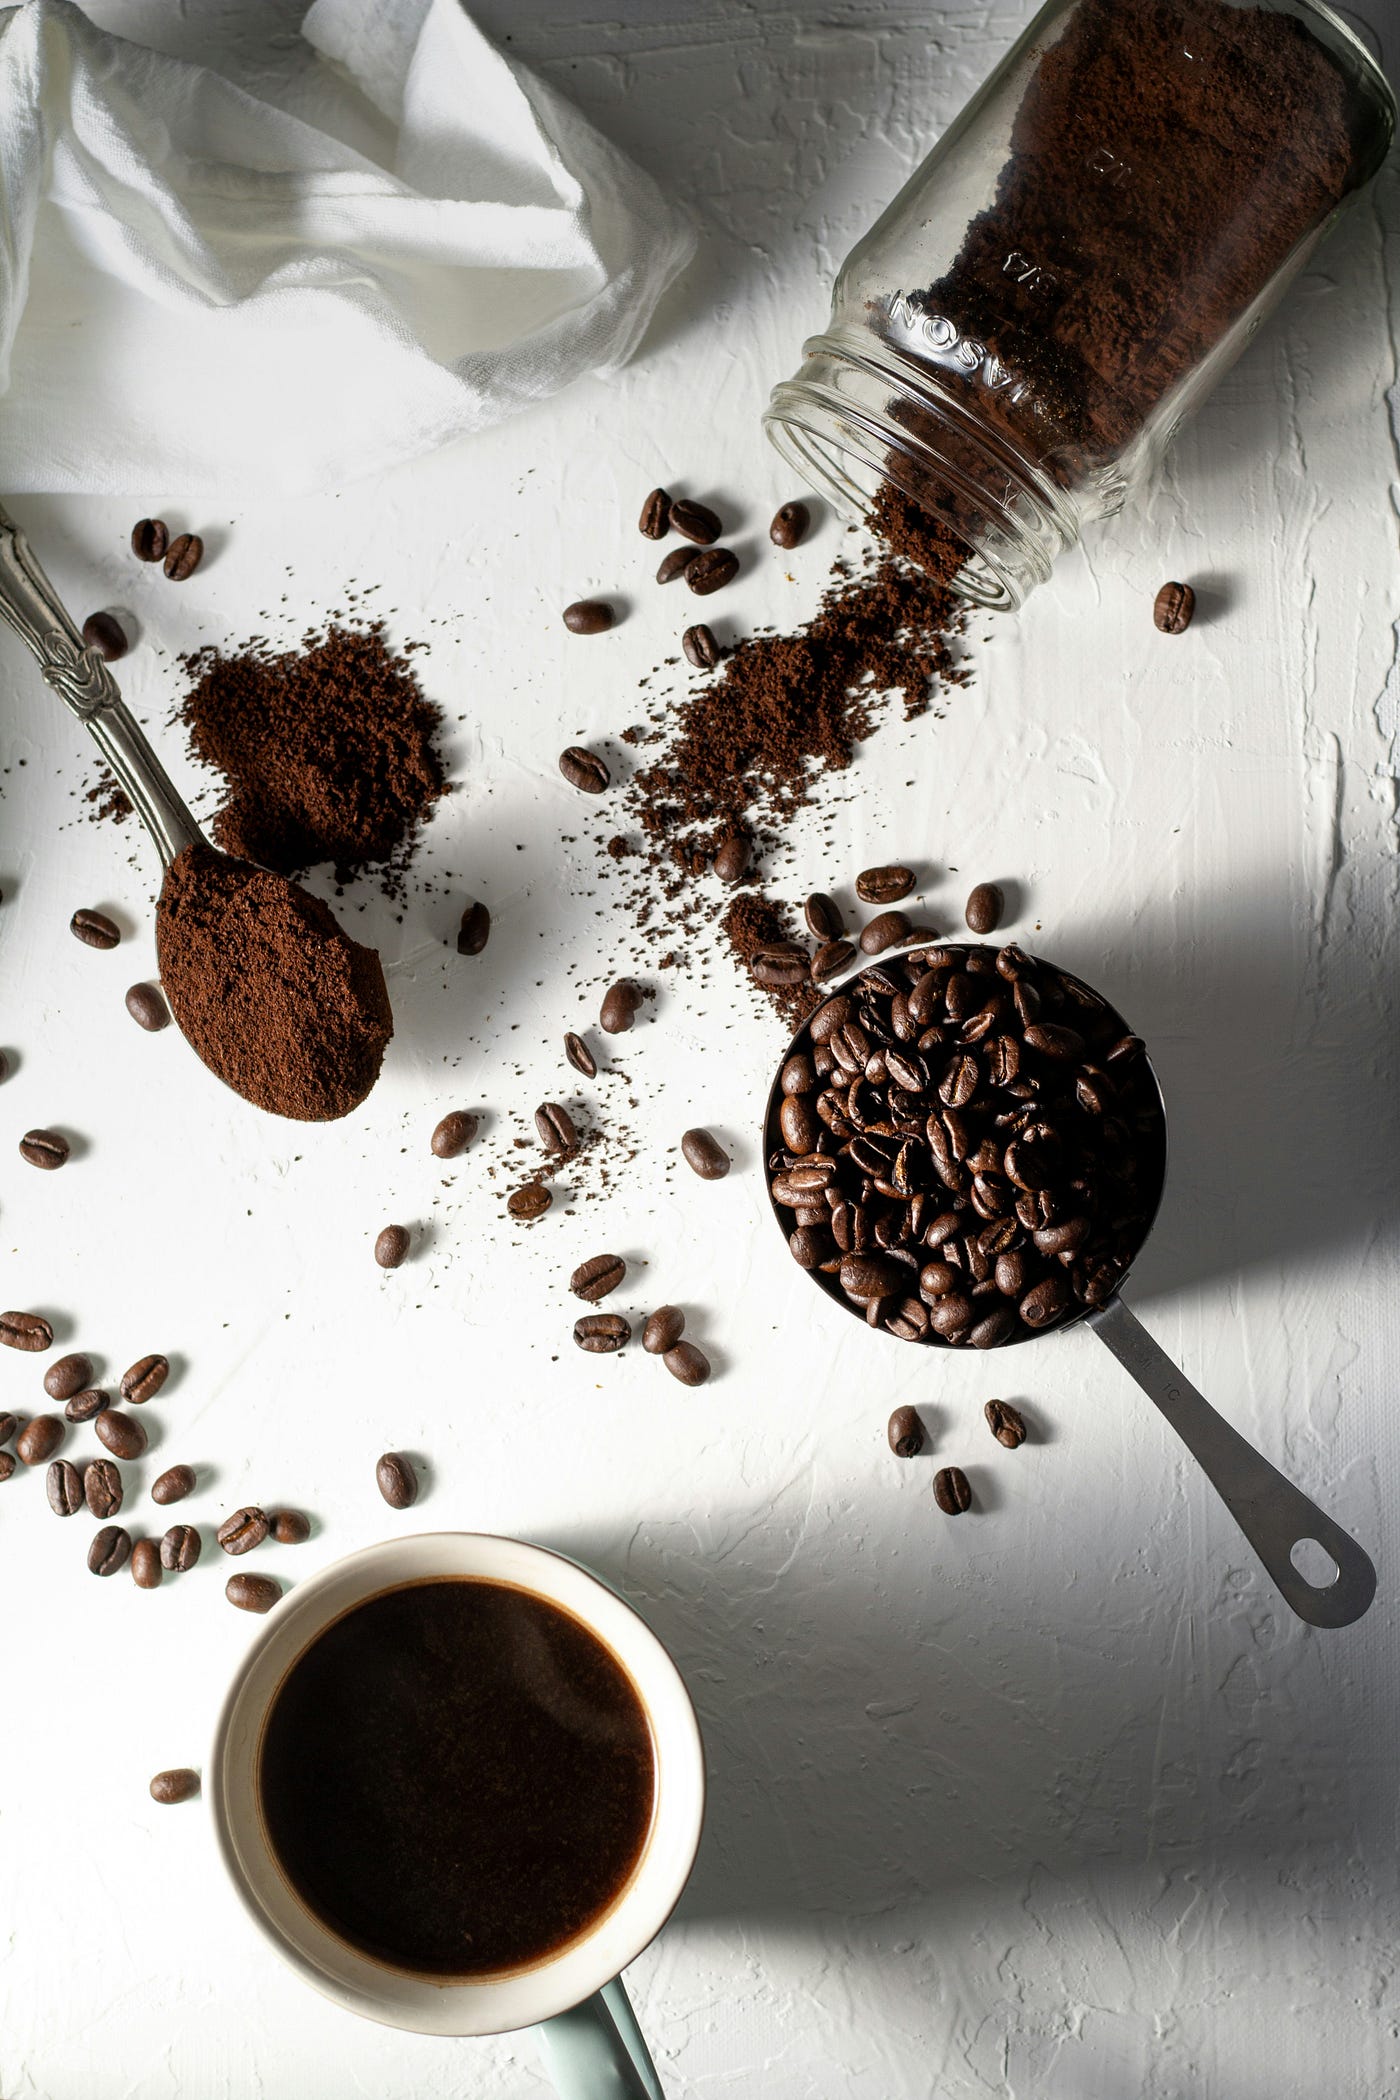 A coffee cup, spoon filled with coffee beans, a smaller spoon with ground coffee, and a glass Mason jar on its side (spilling ground coffee).